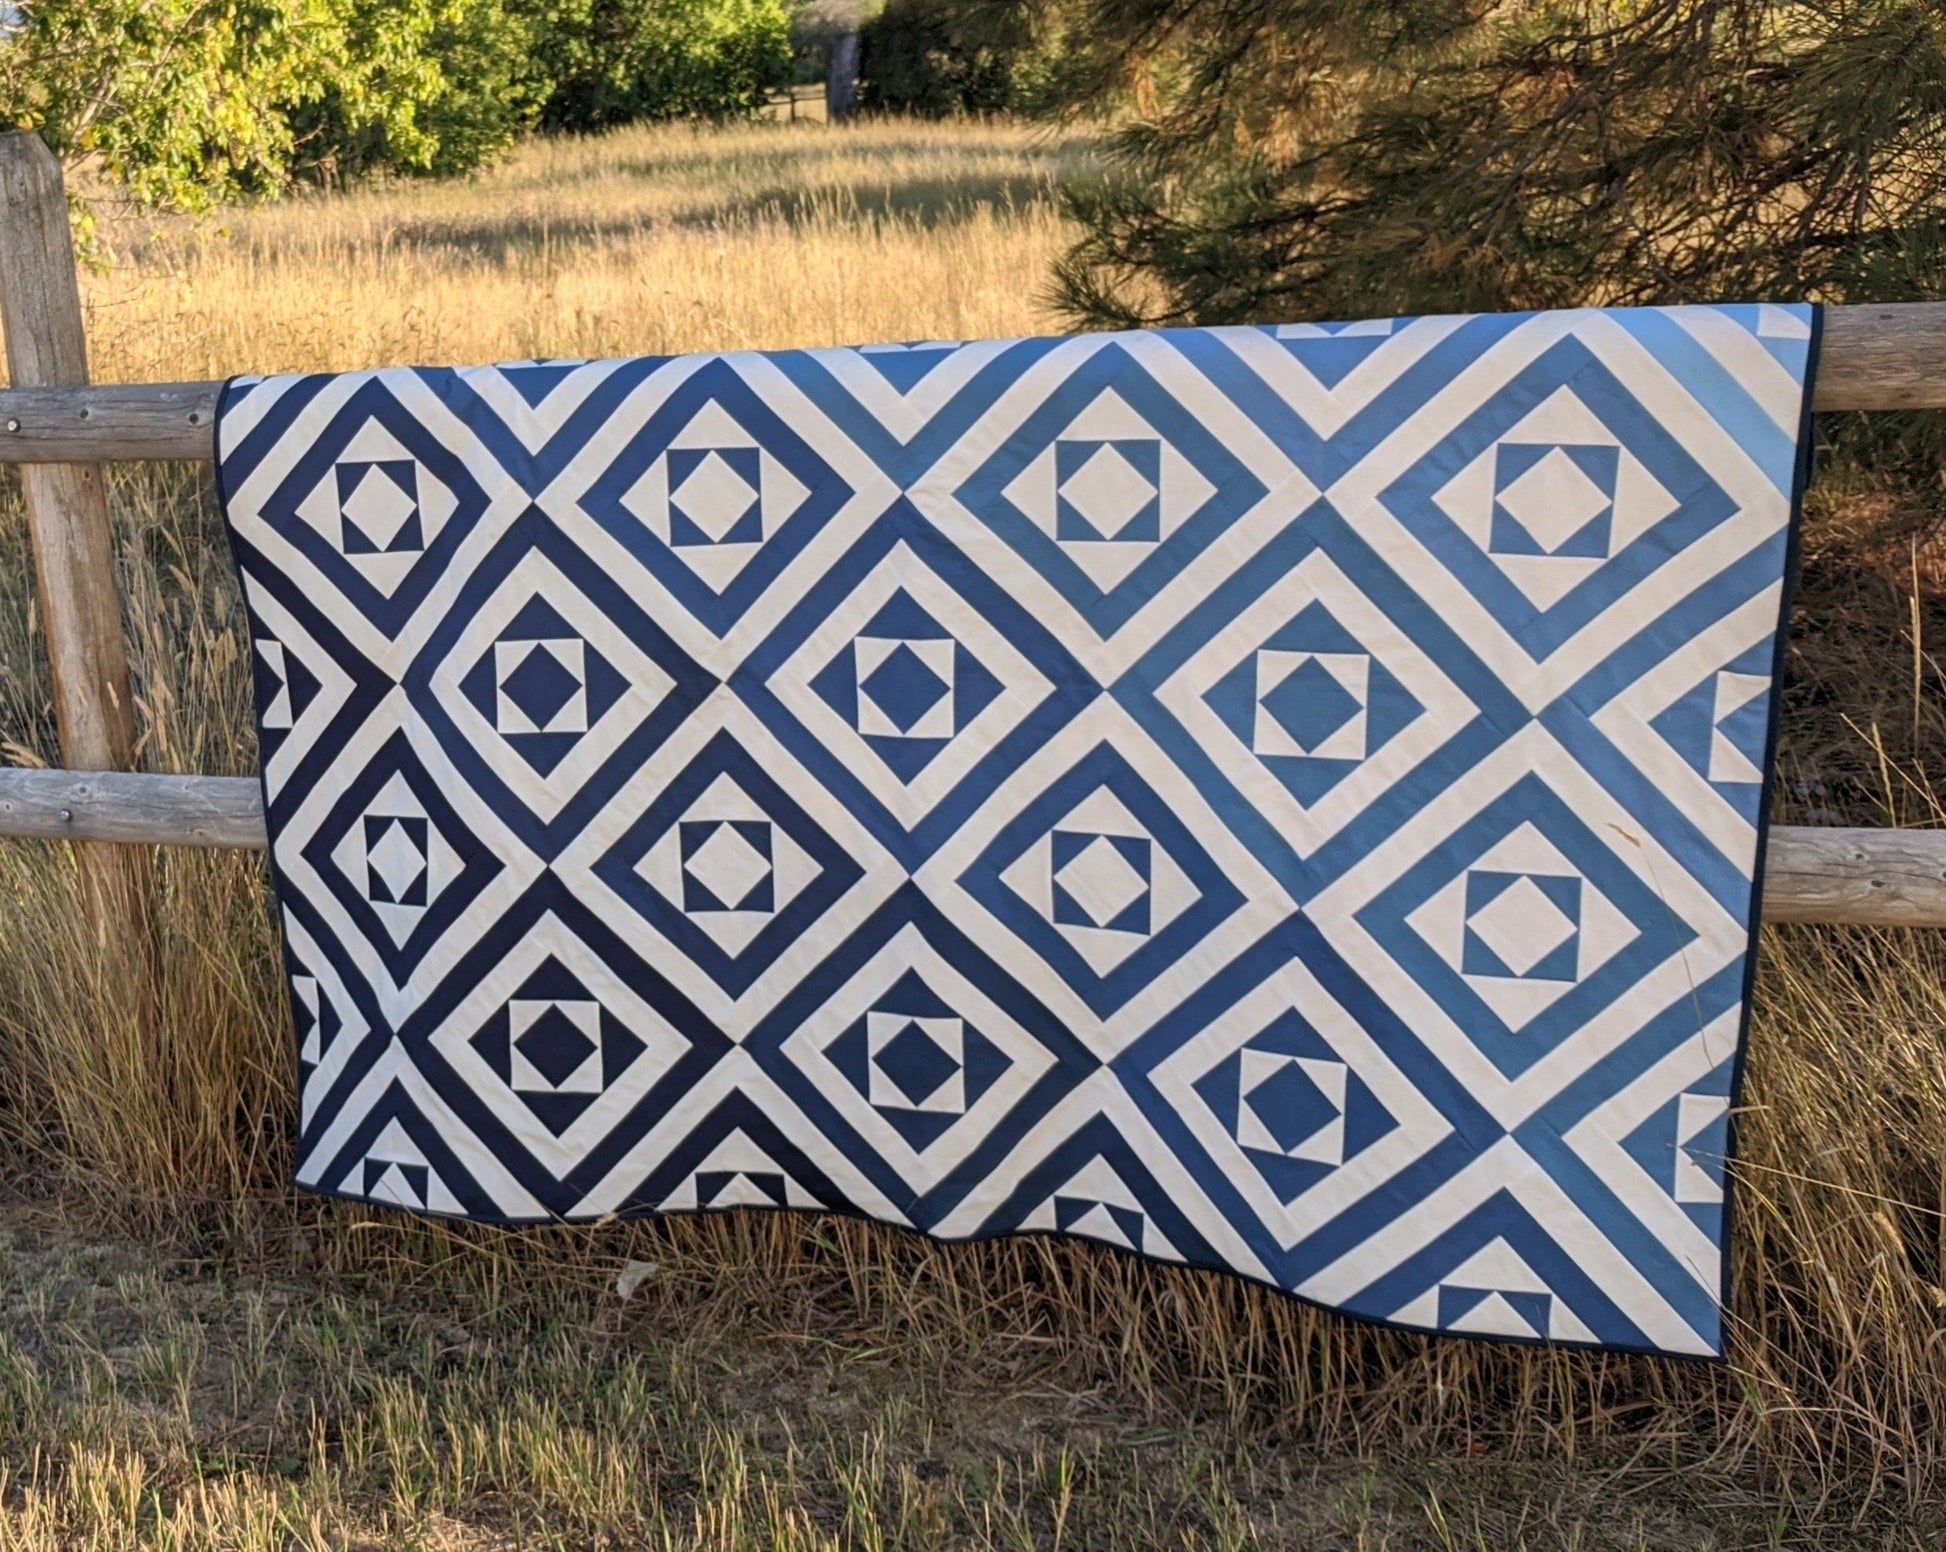 Modern ombre blue quilt on fence.